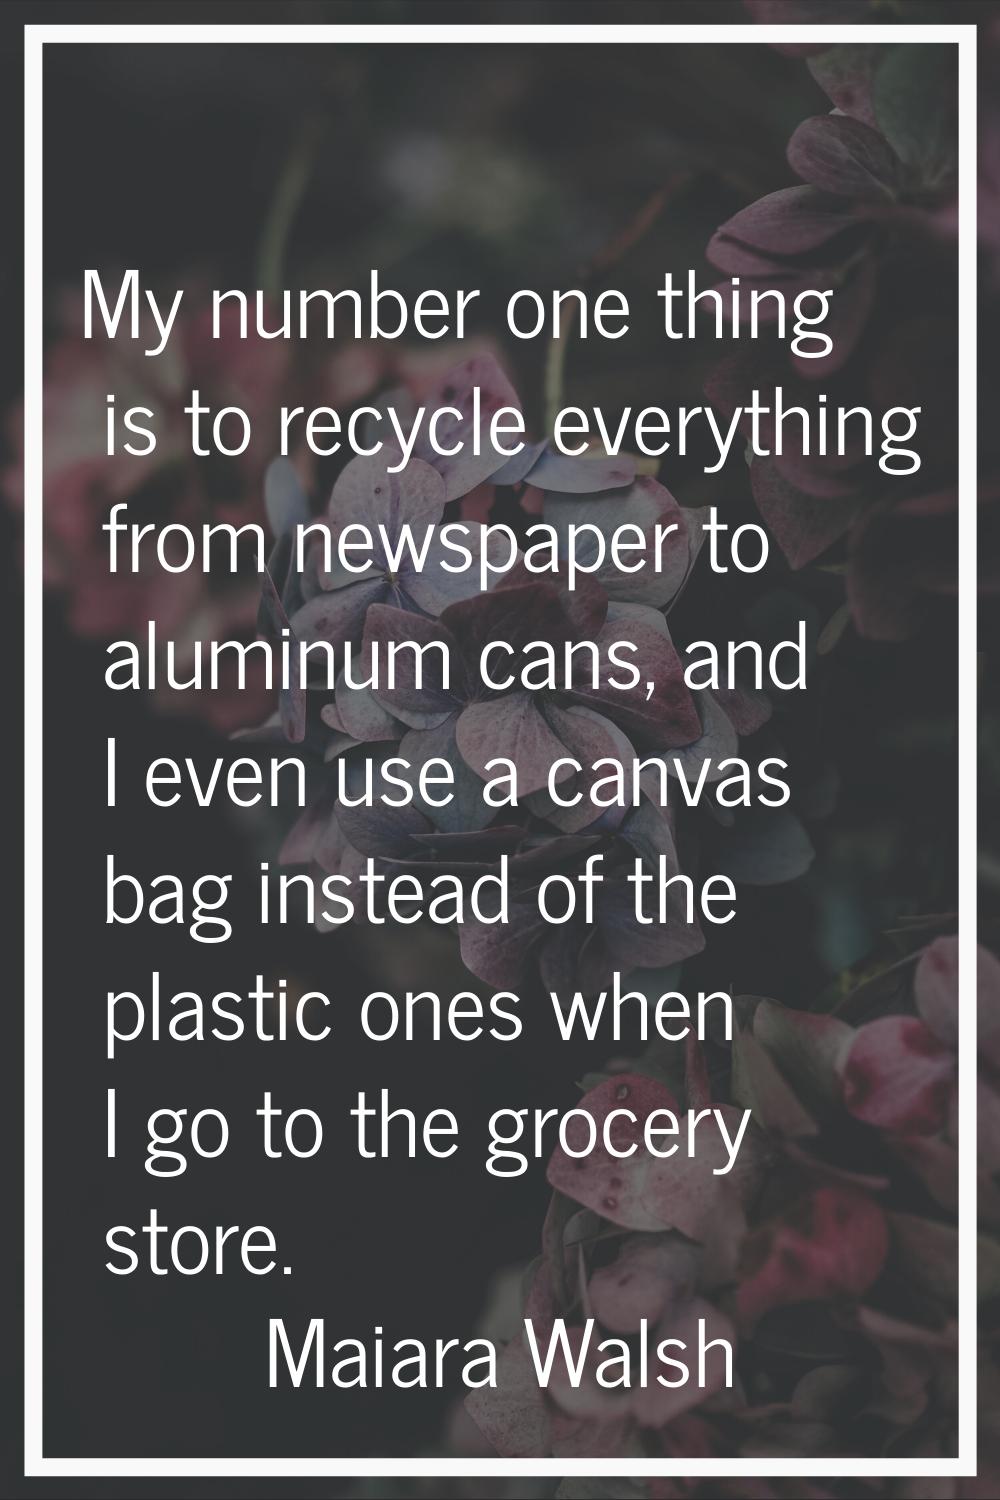 My number one thing is to recycle everything from newspaper to aluminum cans, and I even use a canv